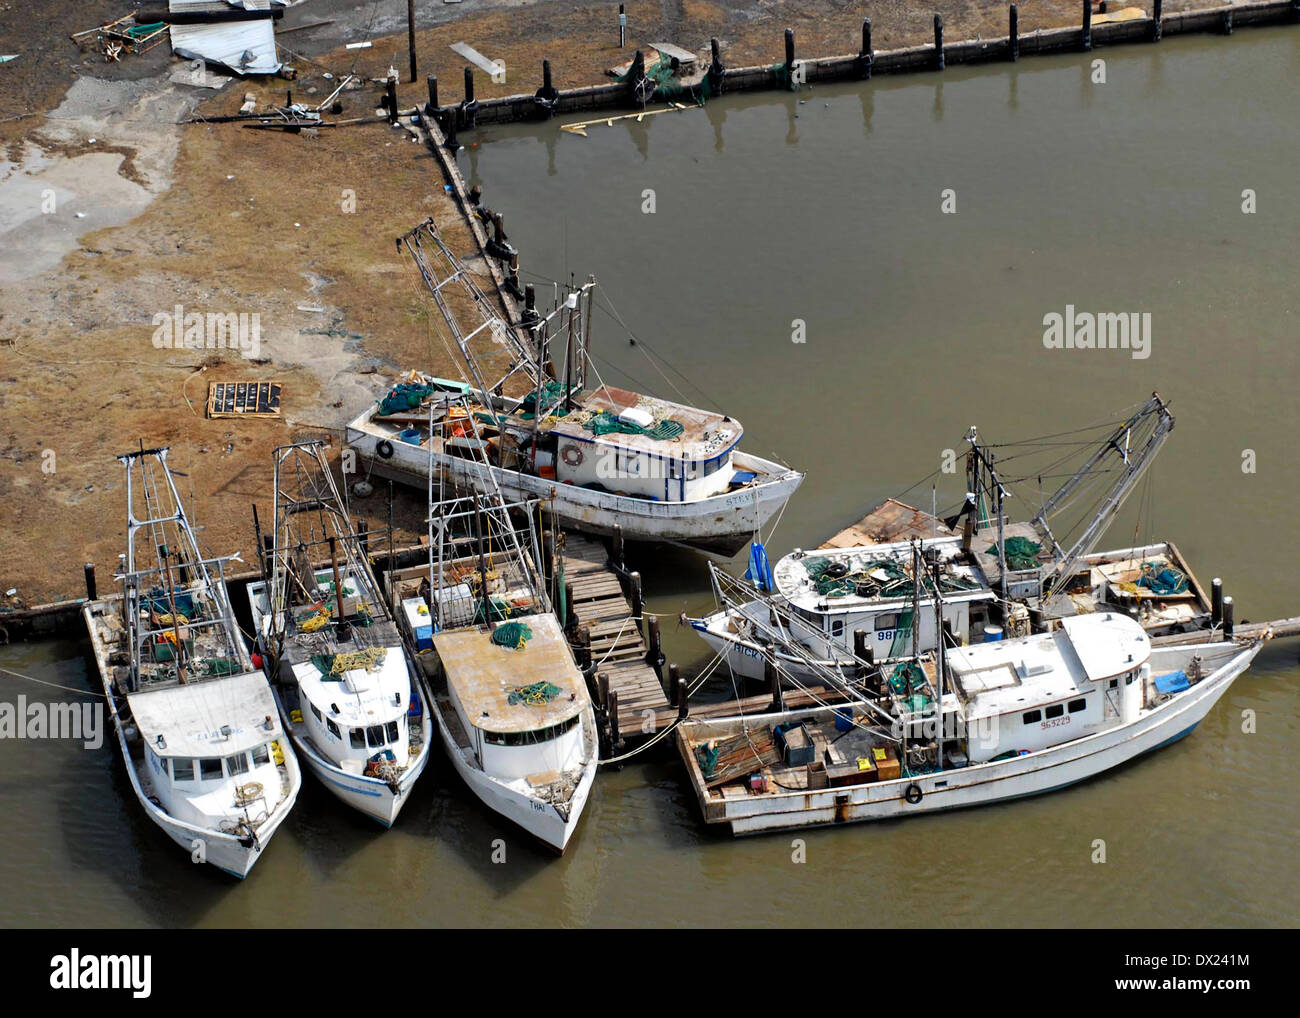 Damaged fishing boats thrown on shore by Hurricane Ike at a boatyard on the Bolivar Peninsula September 13, 2008 in Galveston, Texas. Hurricane Ike struck the Texas Gulf Coast as a strong Category 2 storm causing widespread damage to the region. Stock Photo